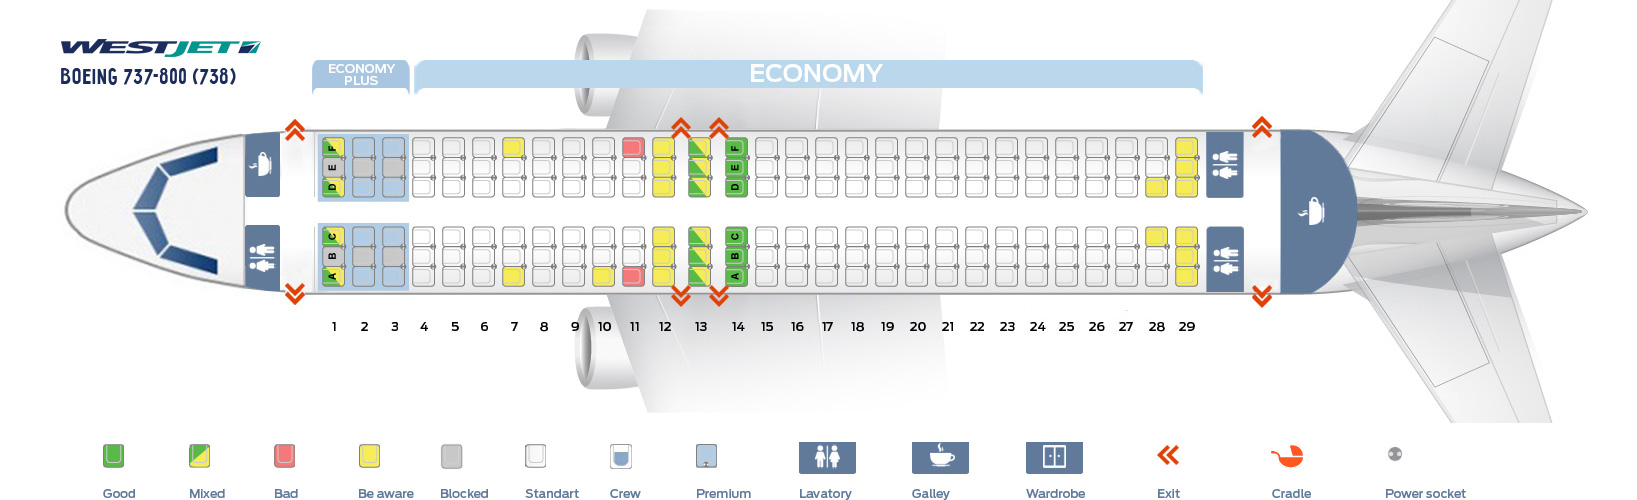 Alaska Airlines Seating Chart 737 800